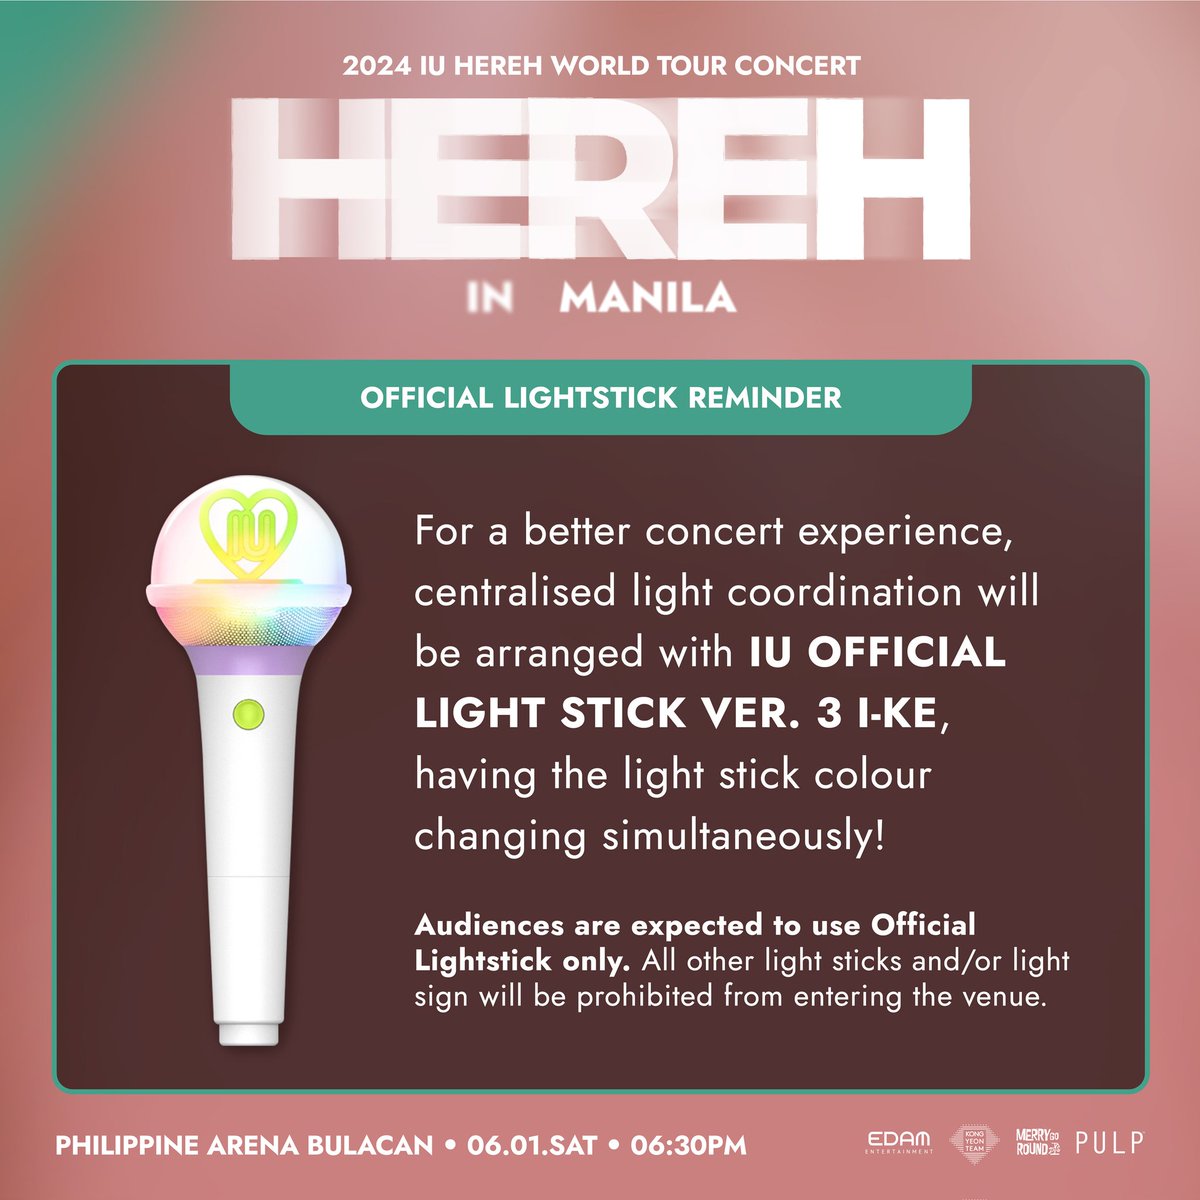 Here’s how to sync your [I-KE] IU official light stick at the 2024 IU HEREH WORLD TOUR CONCERT IN MANILA on June 1 at the Philippine Arena. Let’s light up the whole arena together! 🌟

#아이유 #IU
#HEREH #HEREH_WORLD_TOUR_IN_MANILA